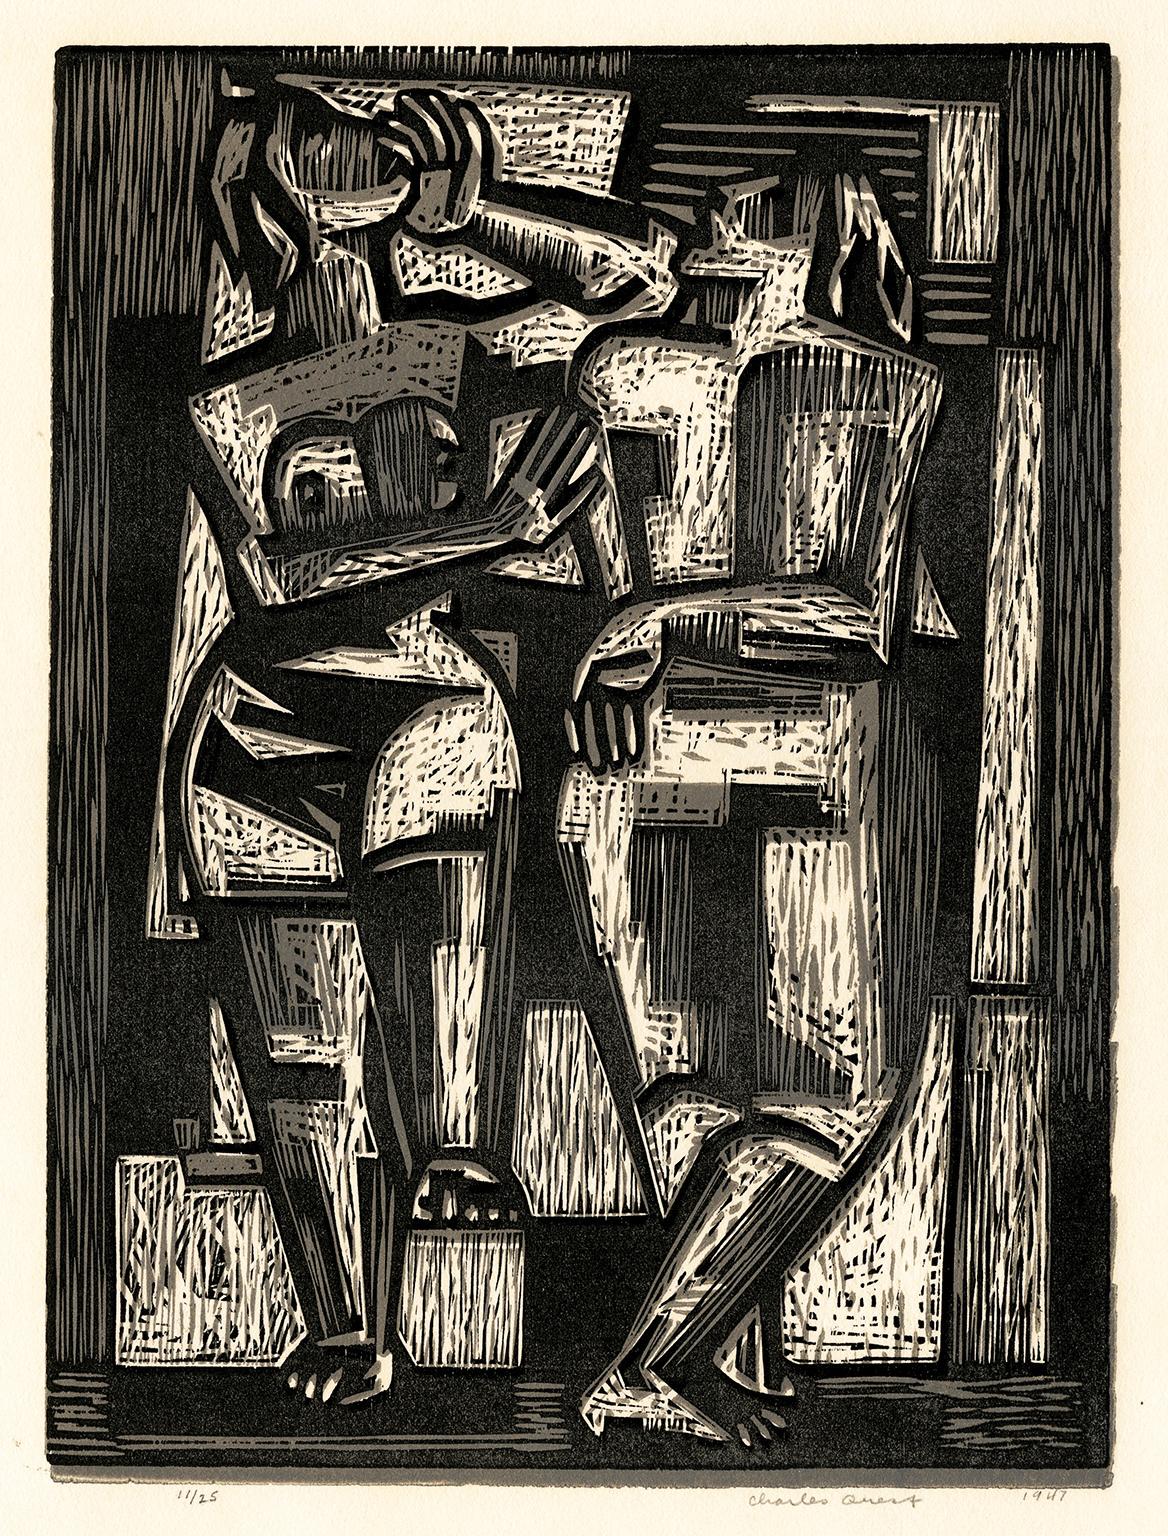 Charles Quest Abstract Print - 'Two Women' — American Mid-Century Modernism